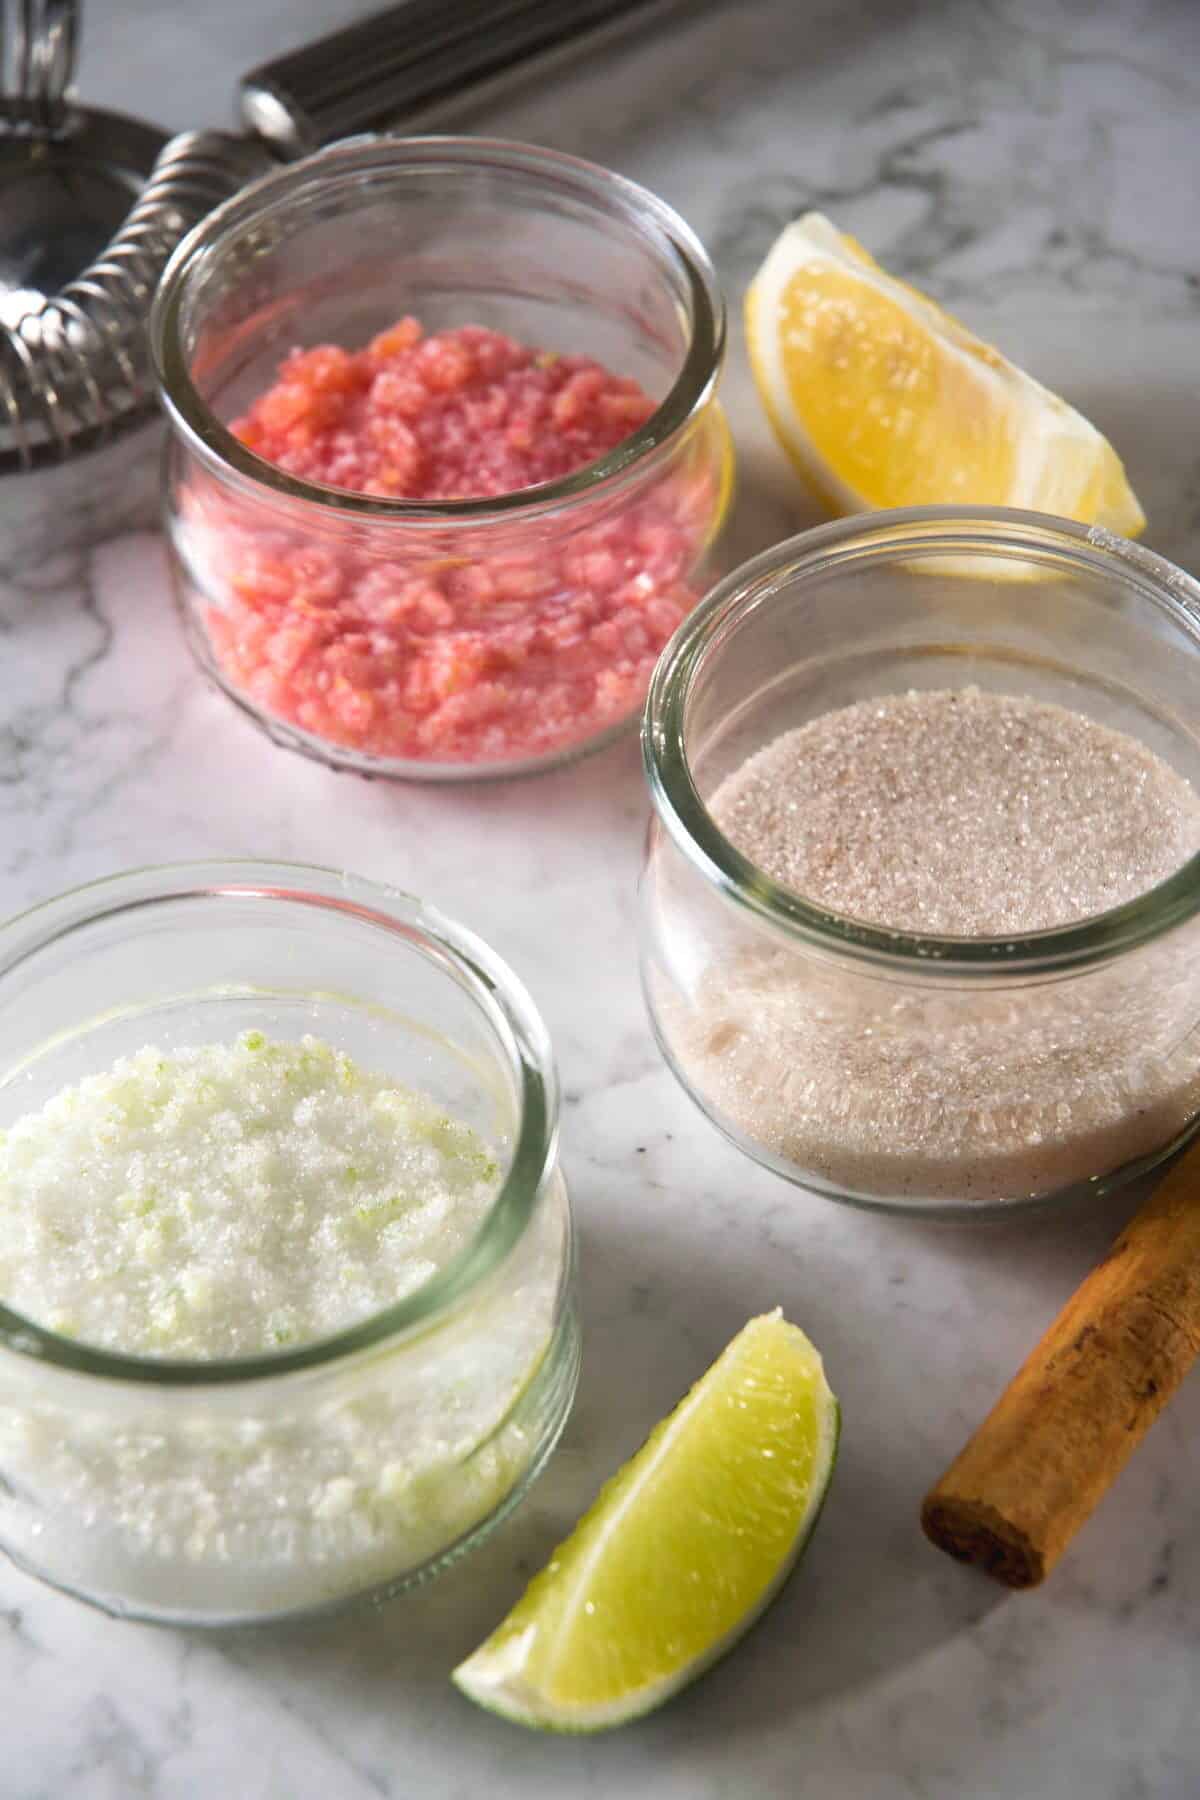 Sugar rims in 3 small jars, a lime wedge, lemon wedge and cinnamon stick on the side.